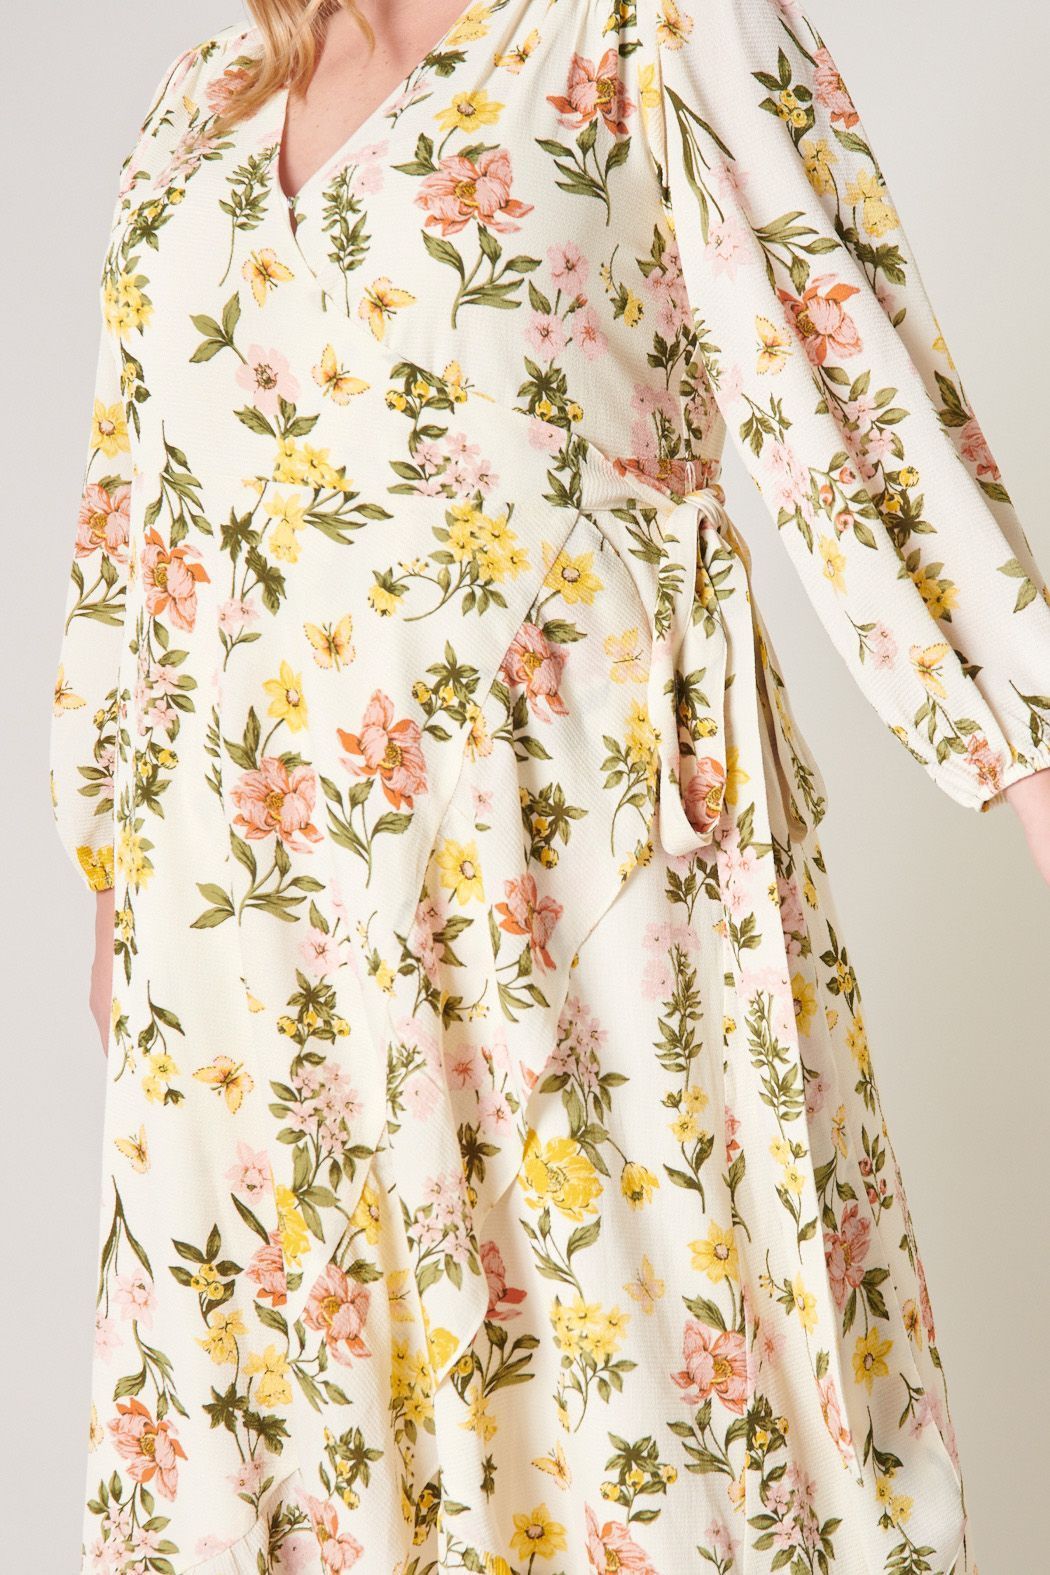 Plus Size Model wearing the Ashlynn Floral Califa Maxi Wrap Dress by SUGARLIPS, featuring a flowing high-low hemline, long sleeves, and a vibrant print of yellow and pink flowers against a light cream background, complemented by beige strappy heels